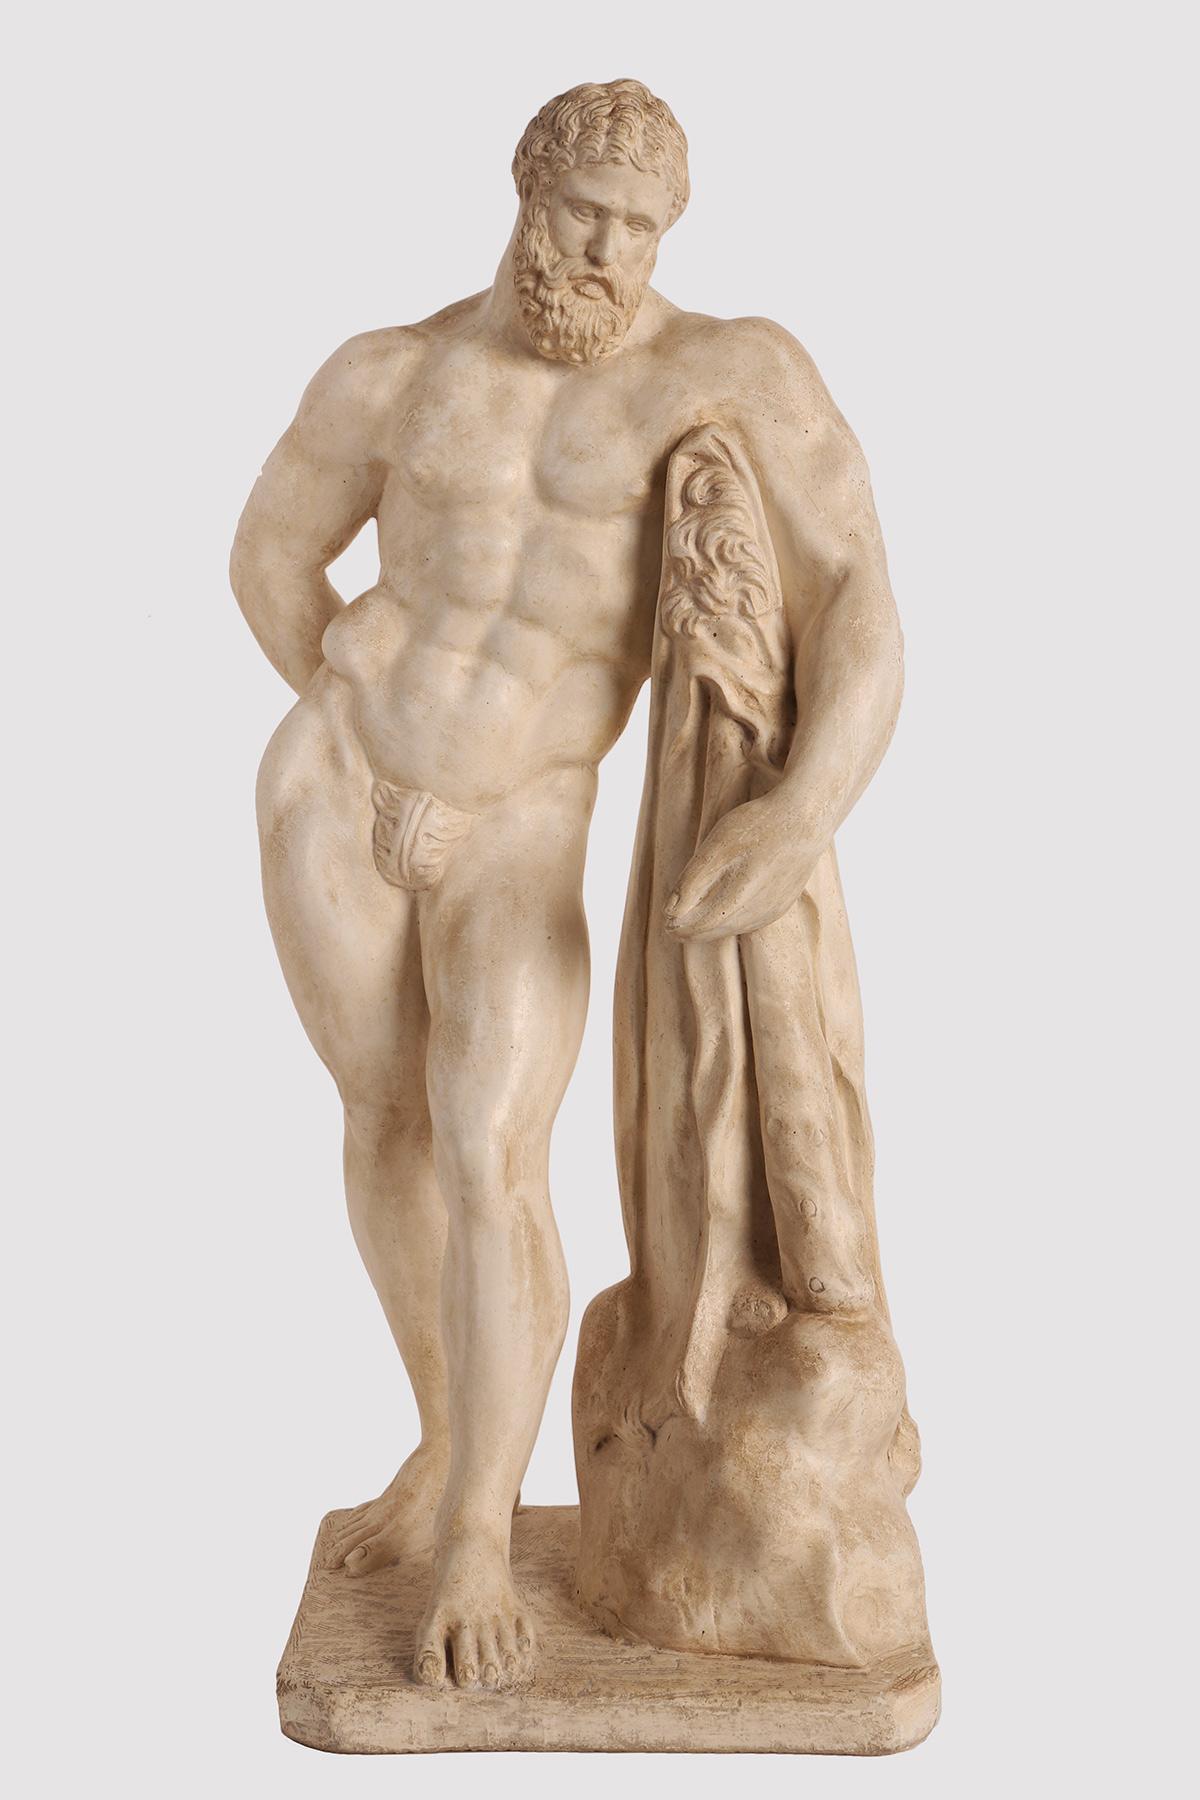 Souvenir of the experience lived on a Grand Tour. Scale reproduction of the Farnese Hercules (defined by Antonio da Sangallo as 